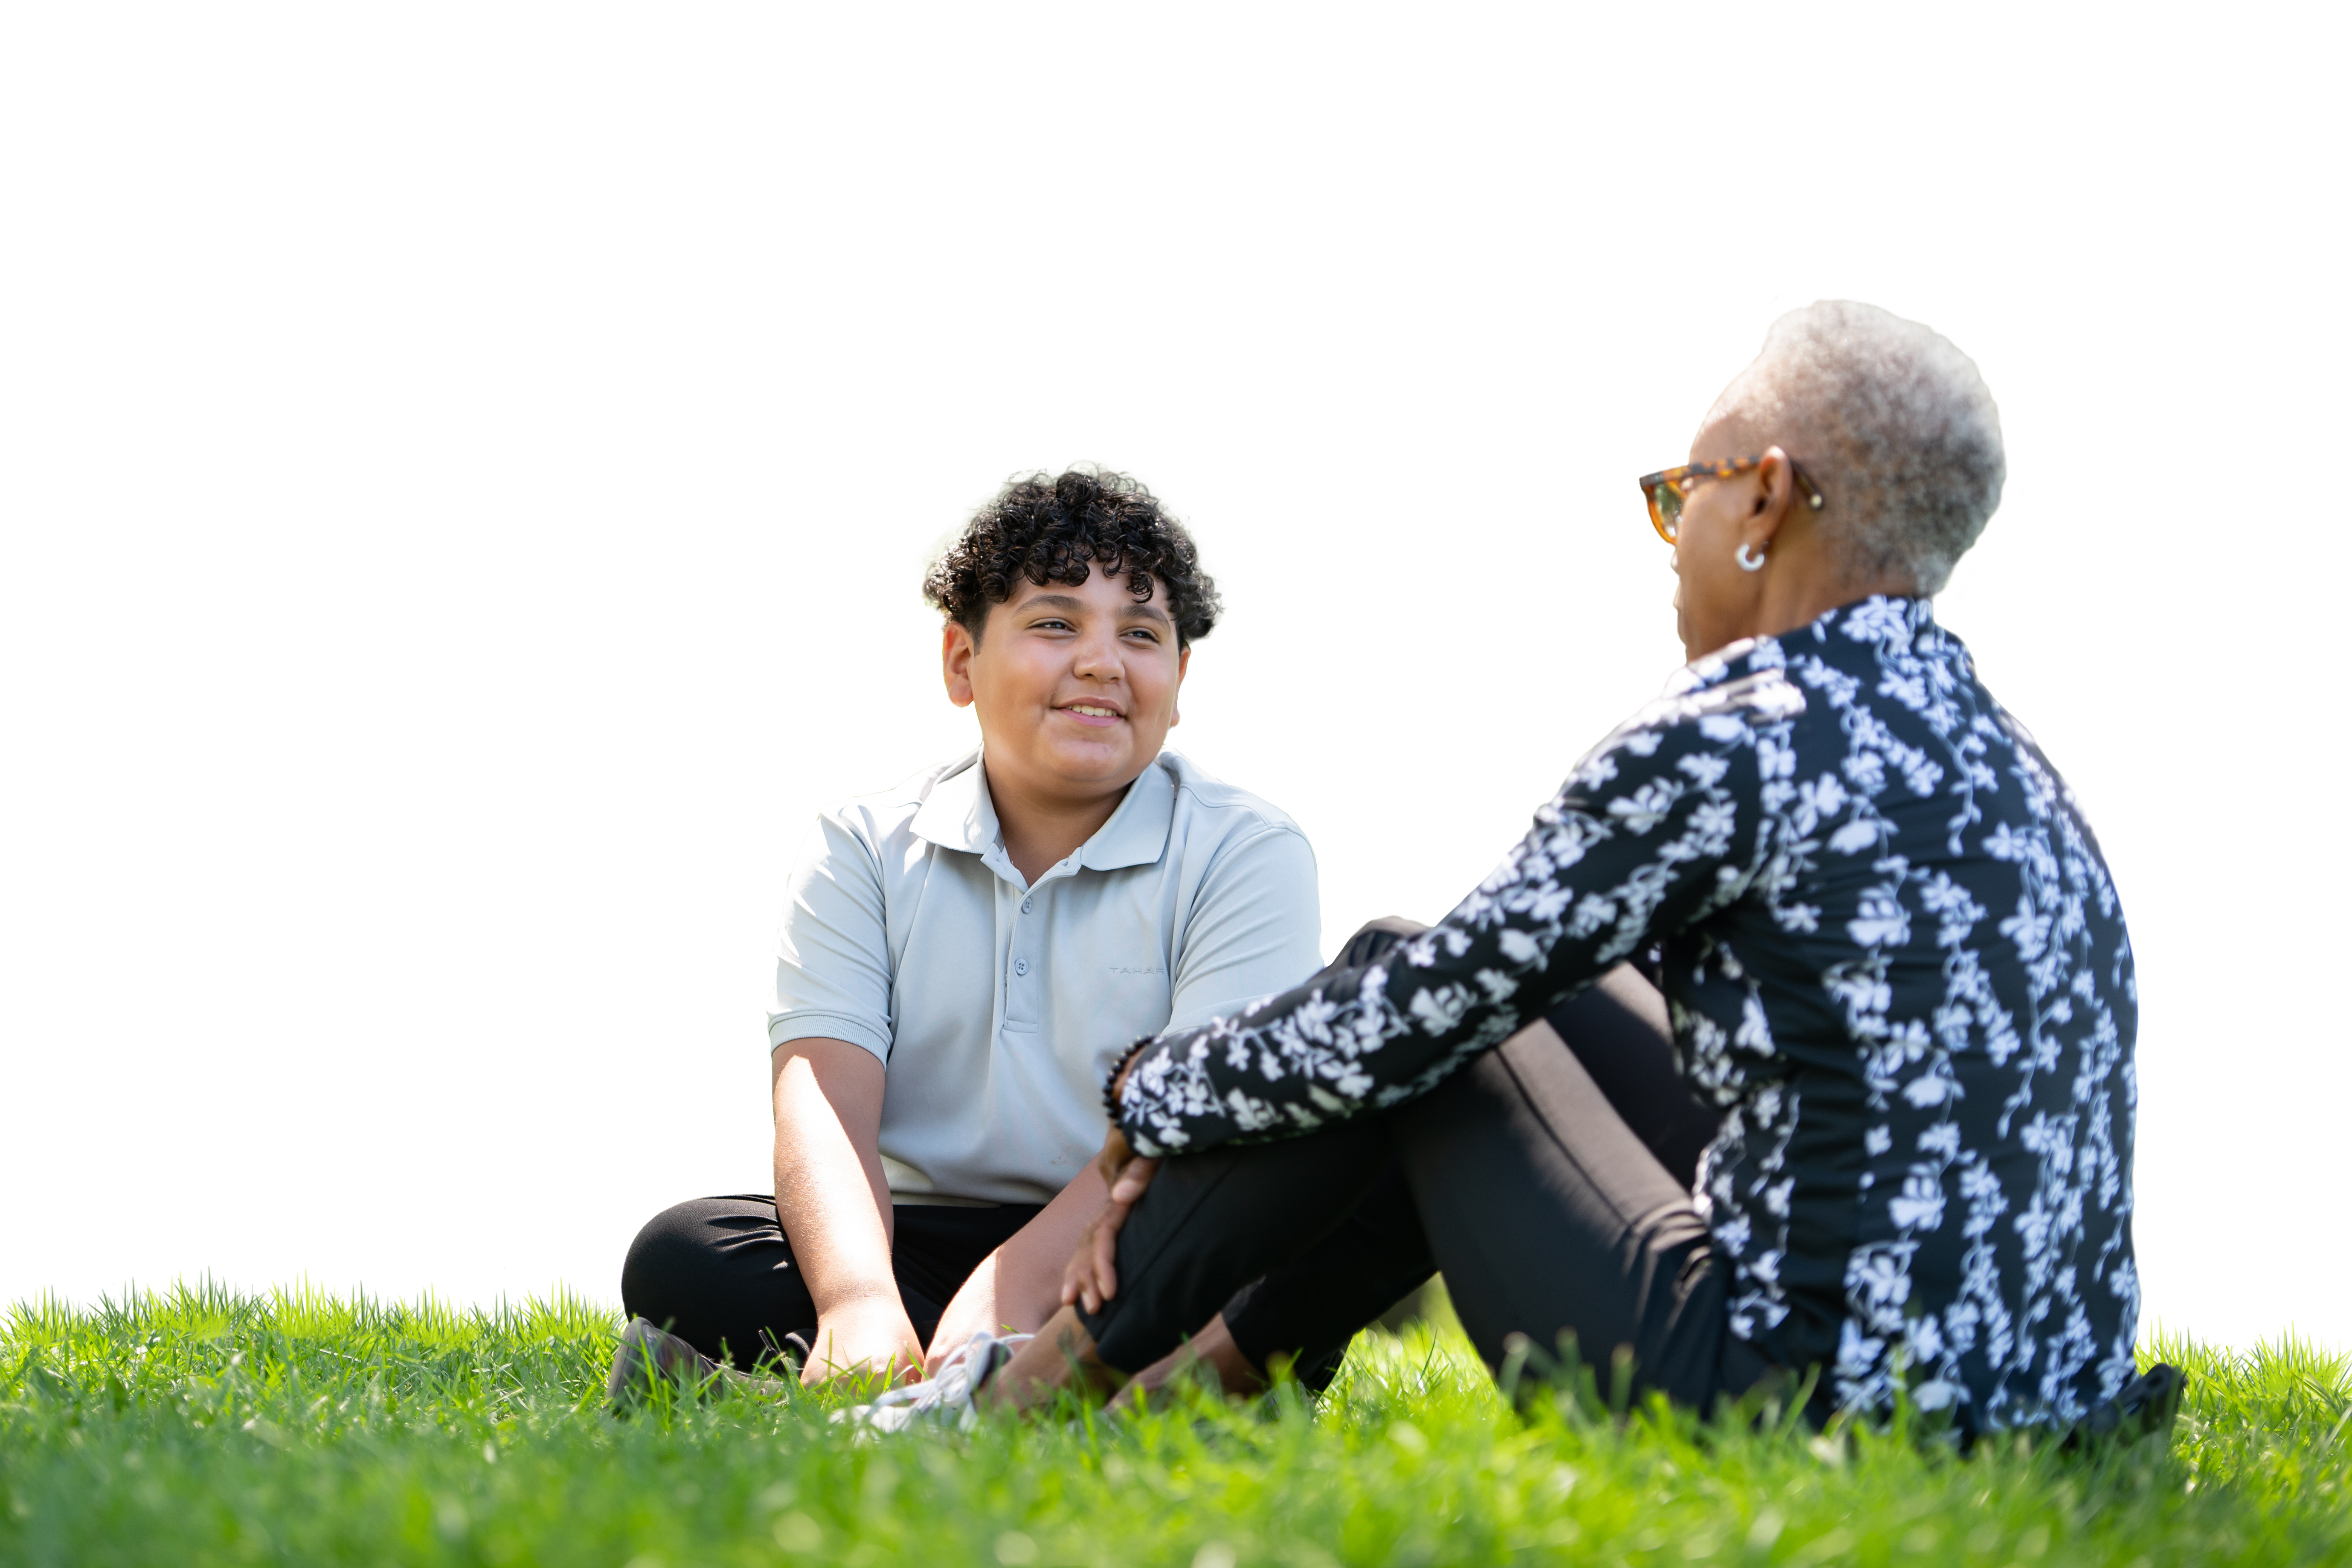 Volunteer sits talking with boy on grass